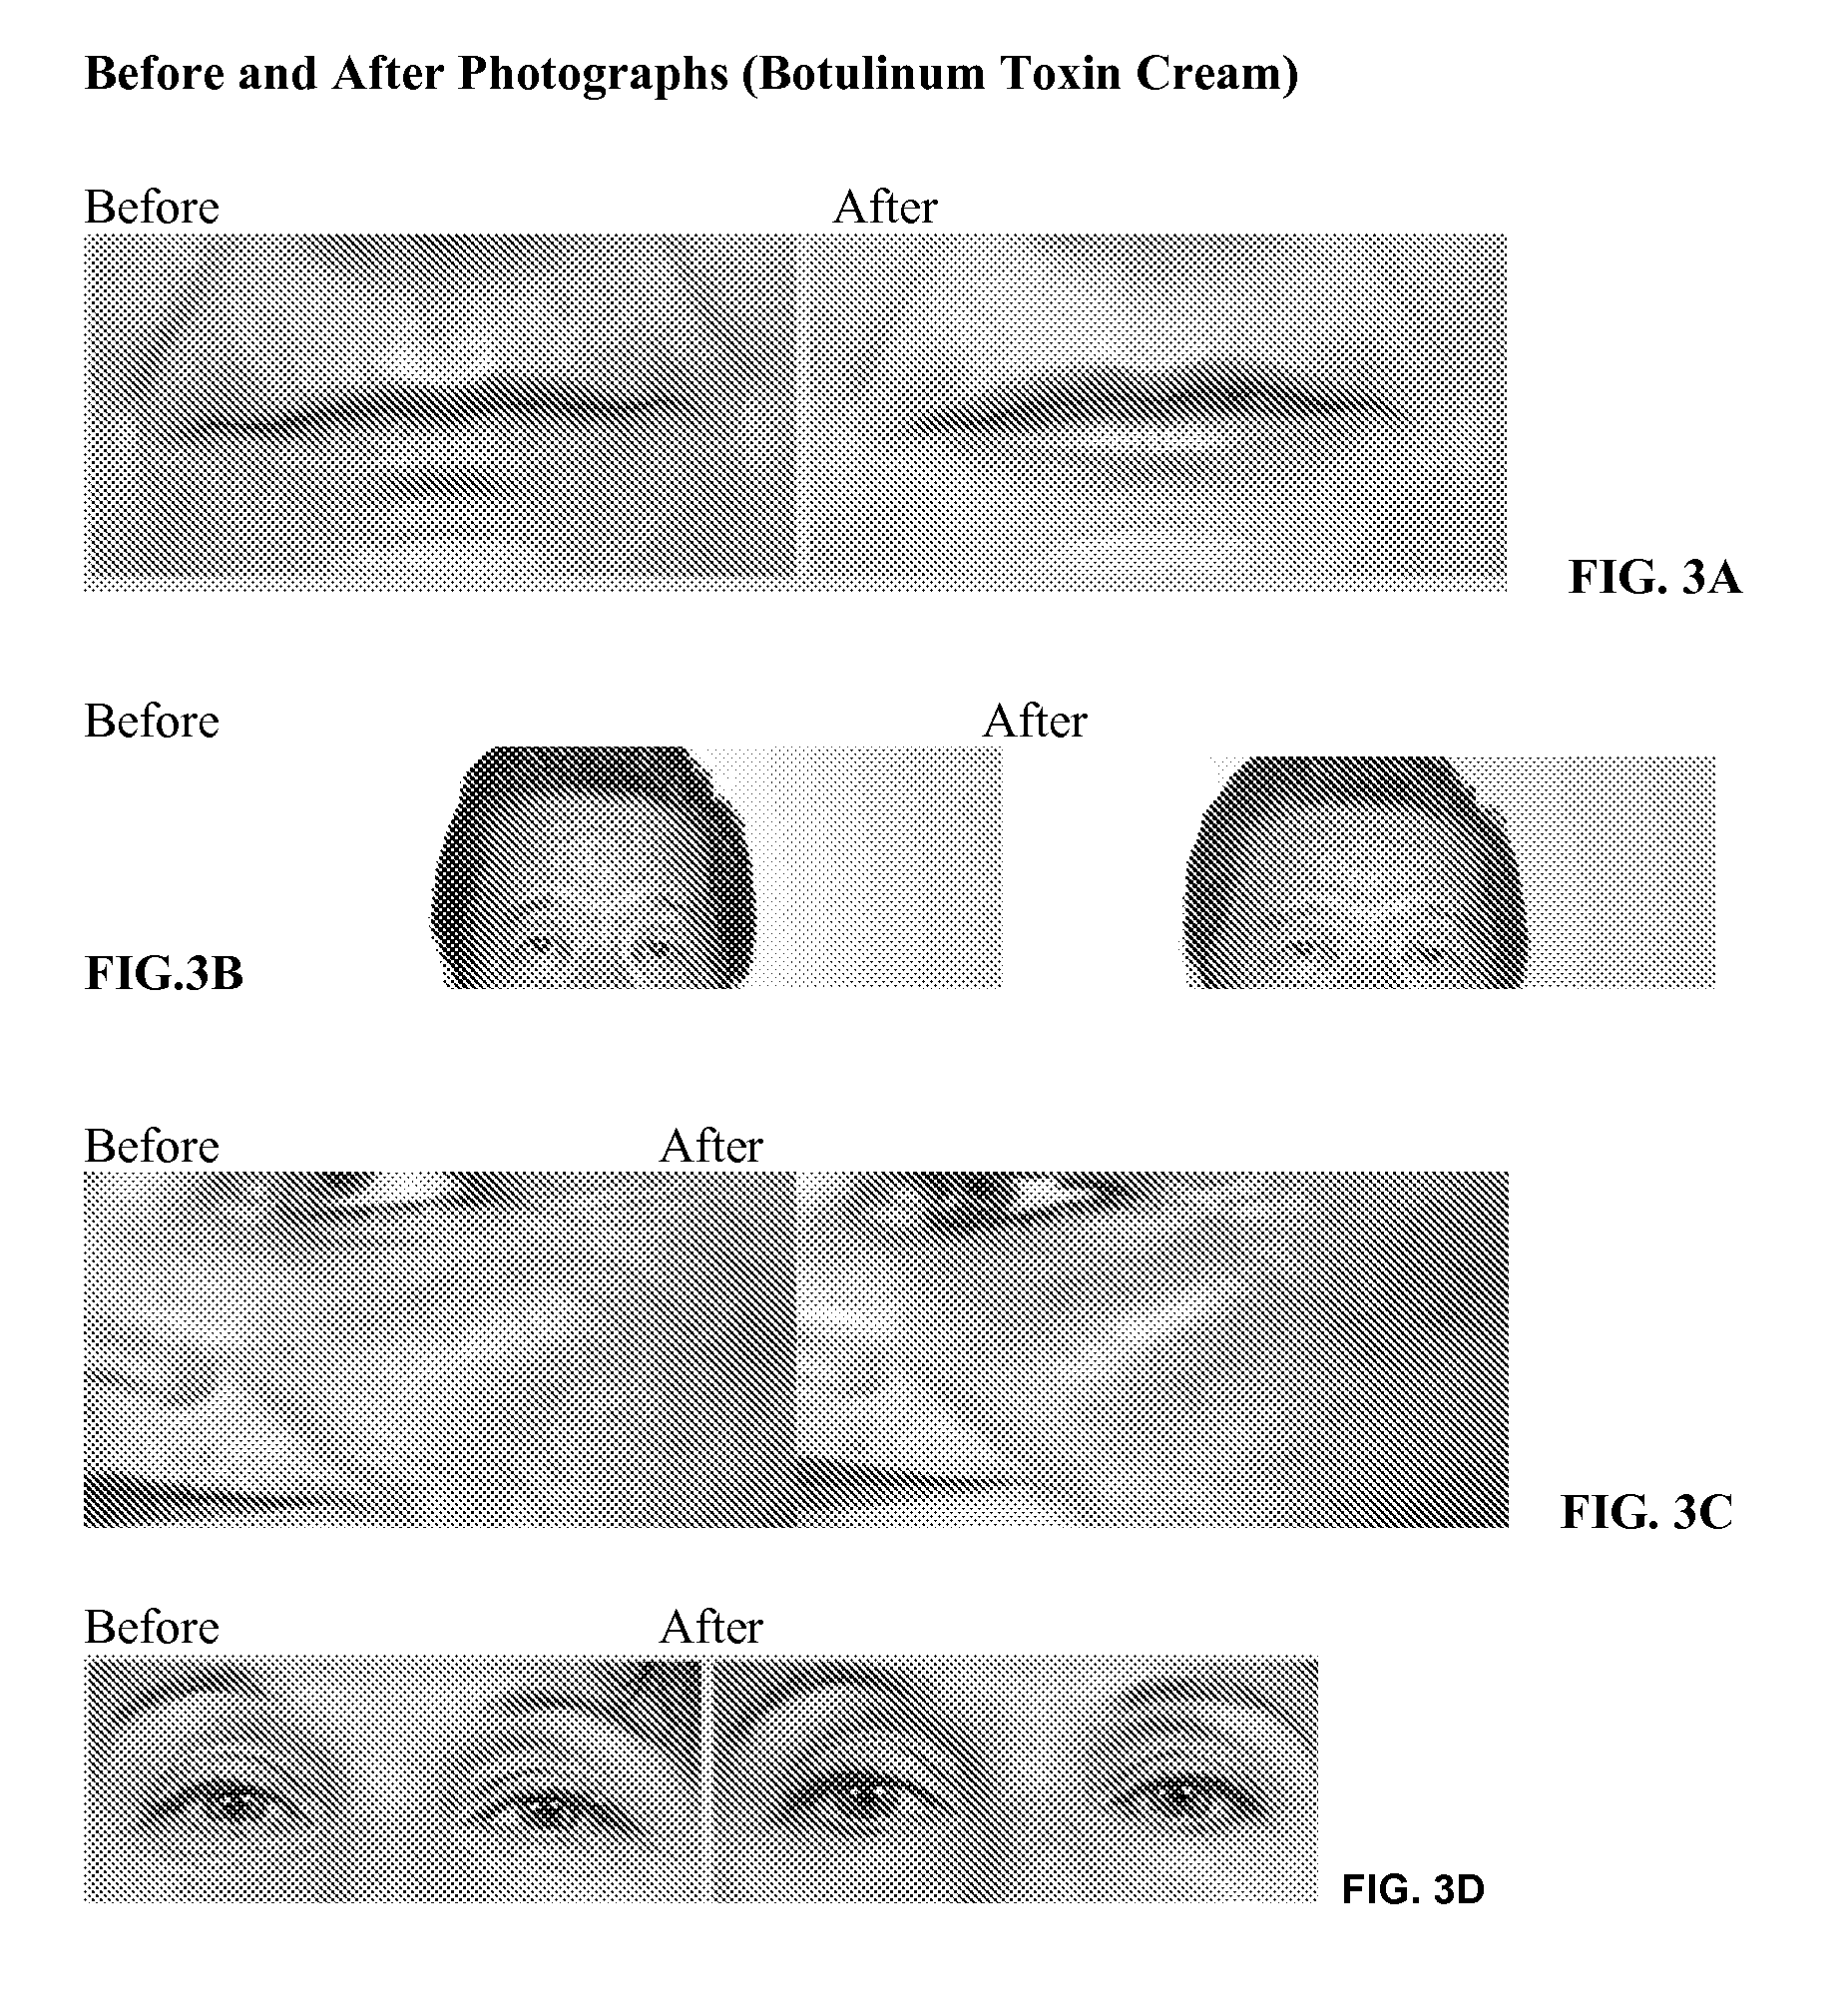 Stabilized compositions for topical administration and methods of making same